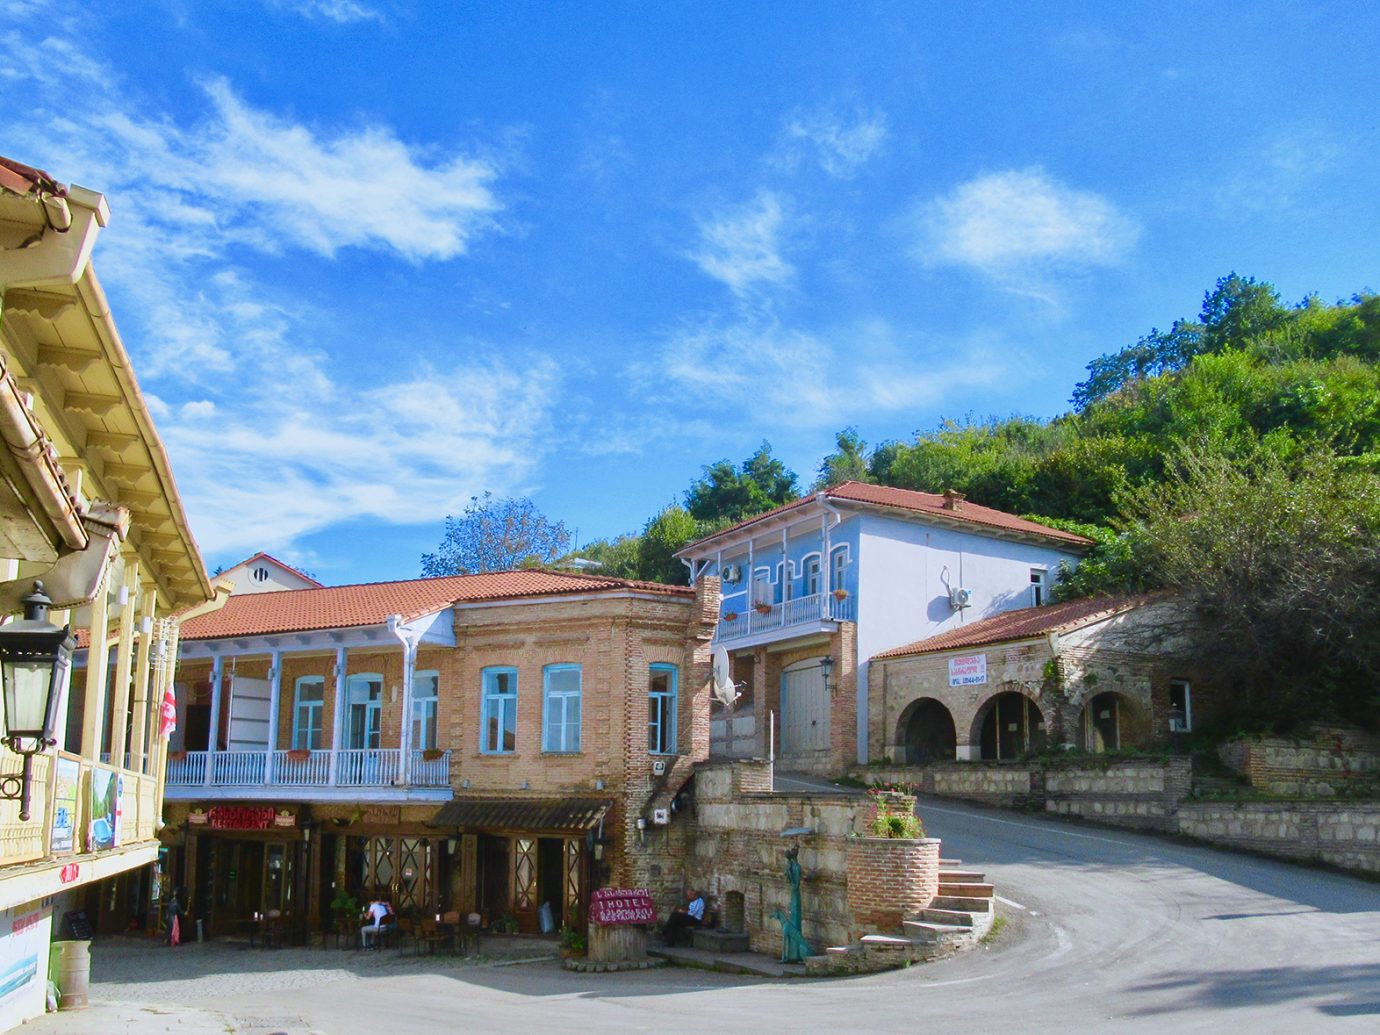 Street view of Sighnaghi